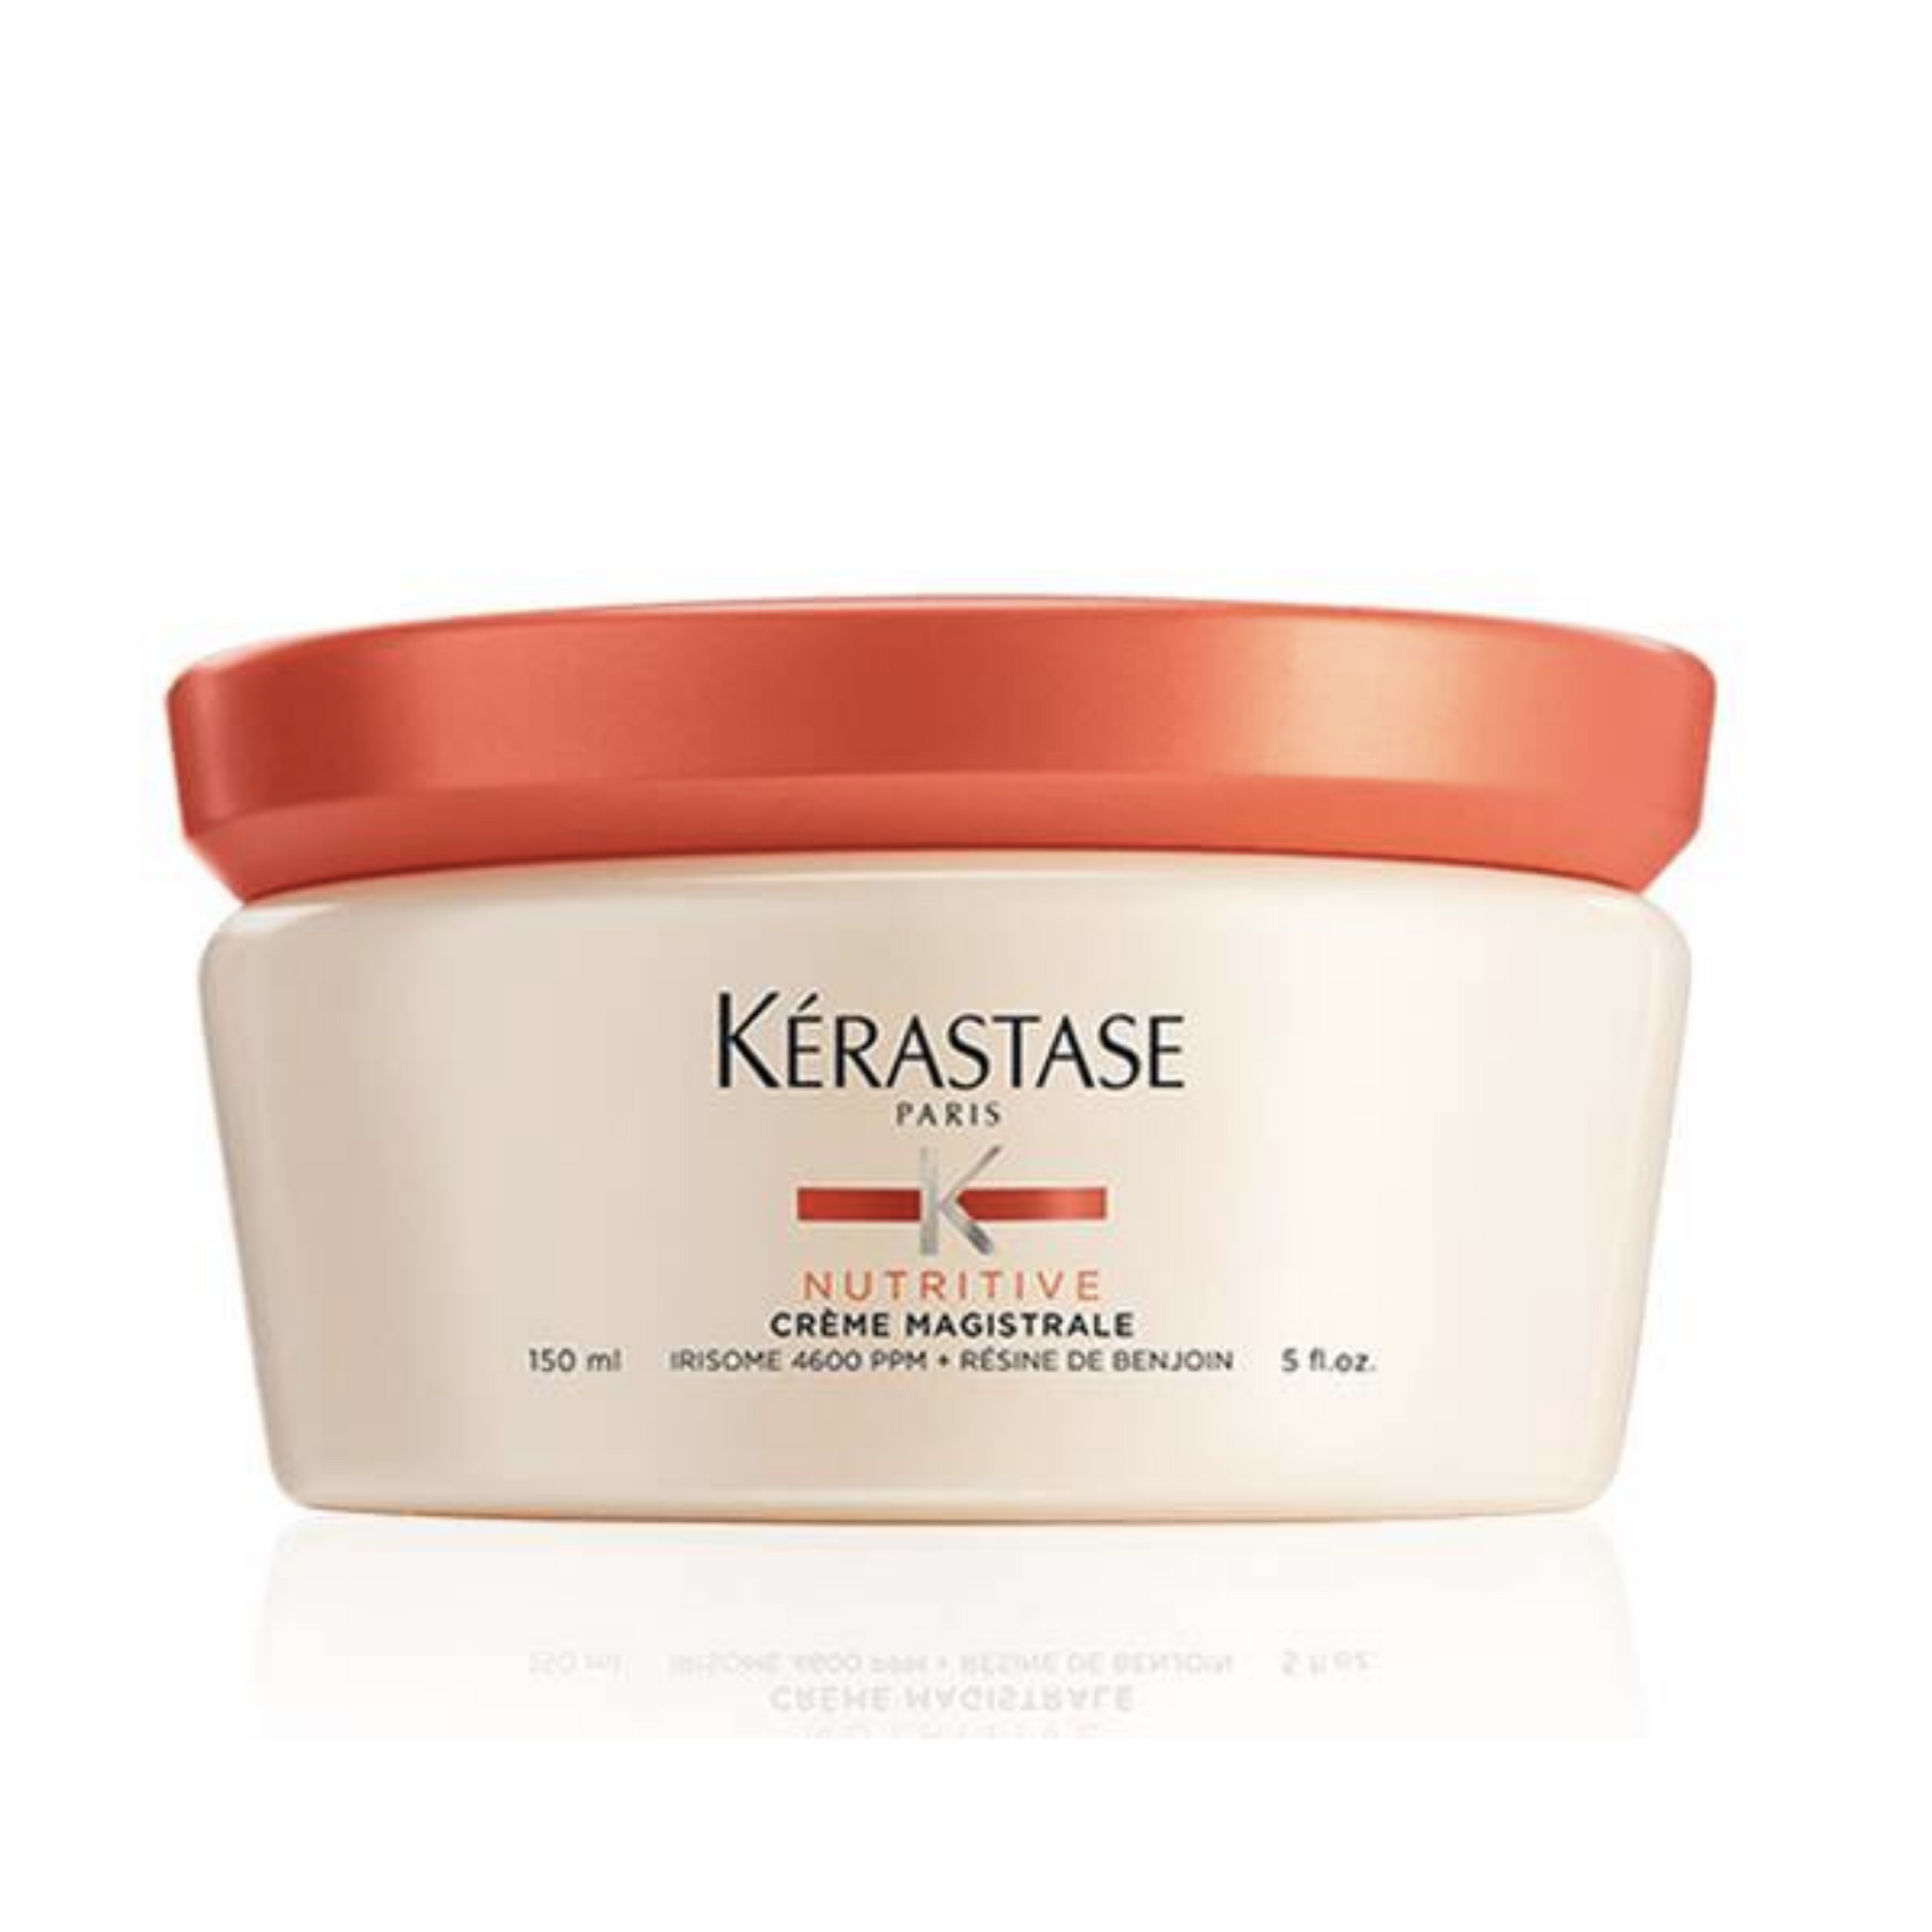 Crème Magistrale Hair Balm - Fundamental nutrition balm for dry to severely dry hair.